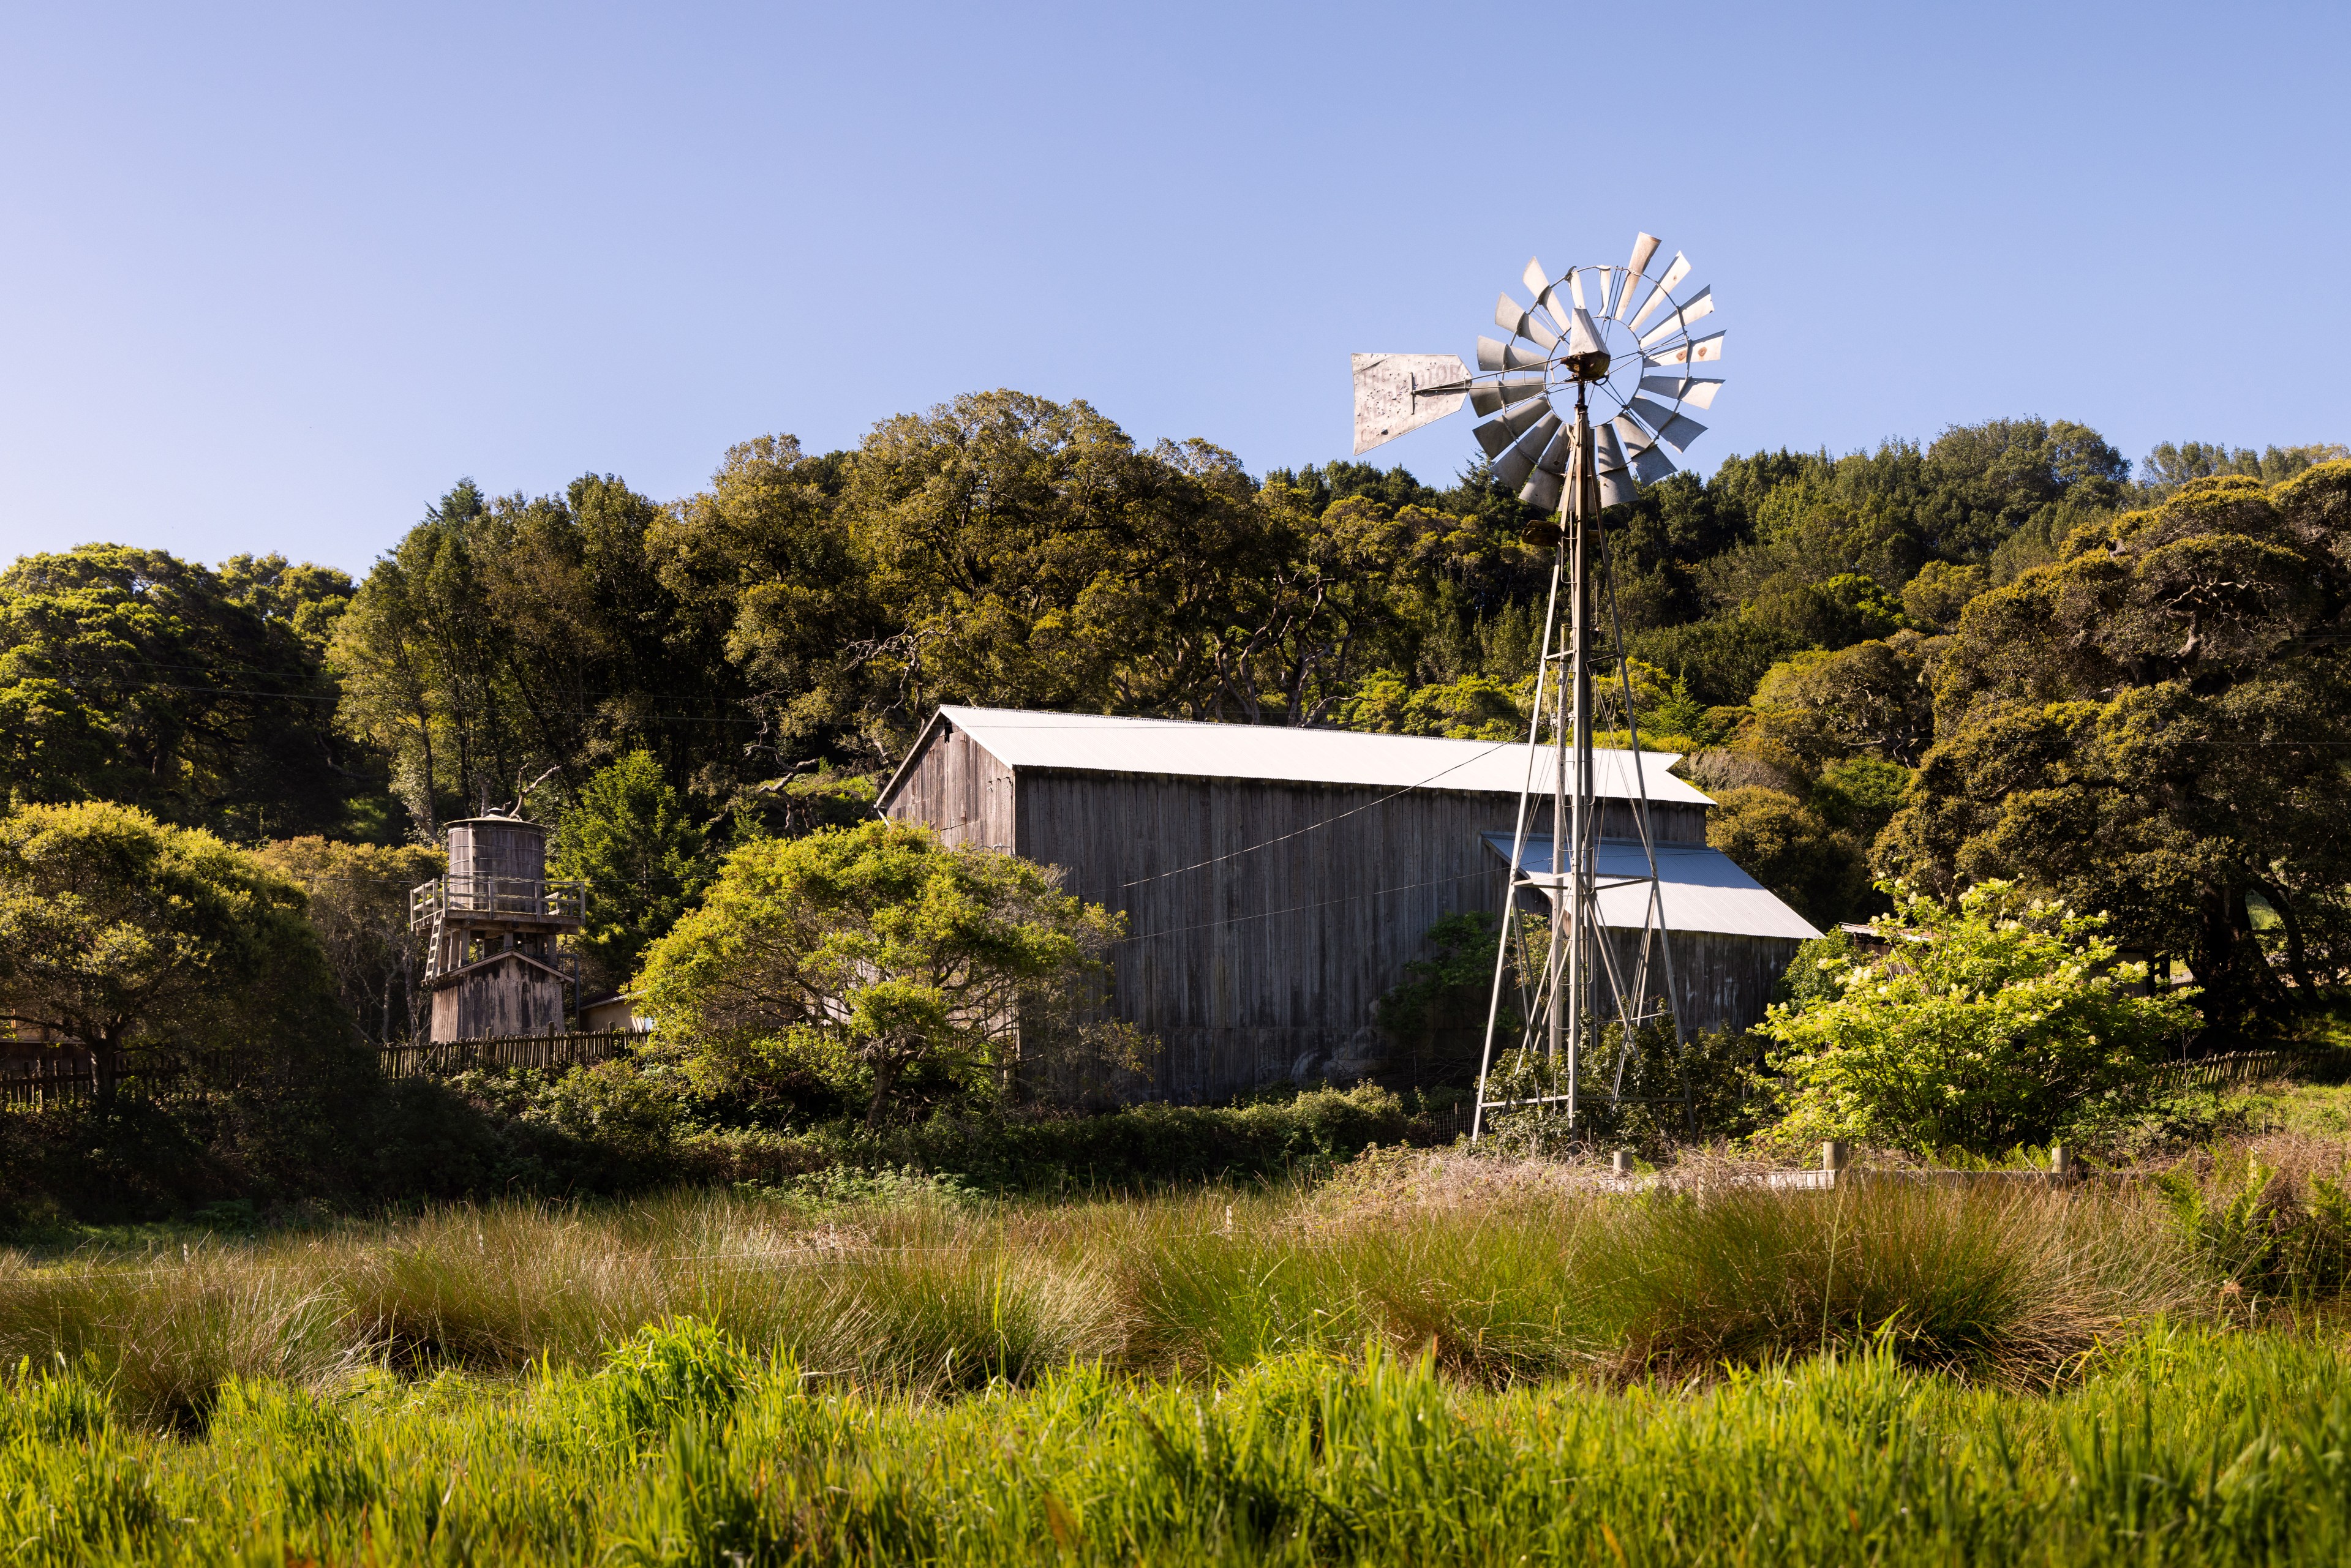 A windmill stands before a rustic barn, surrounded by lush greenery and trees under a clear sky.